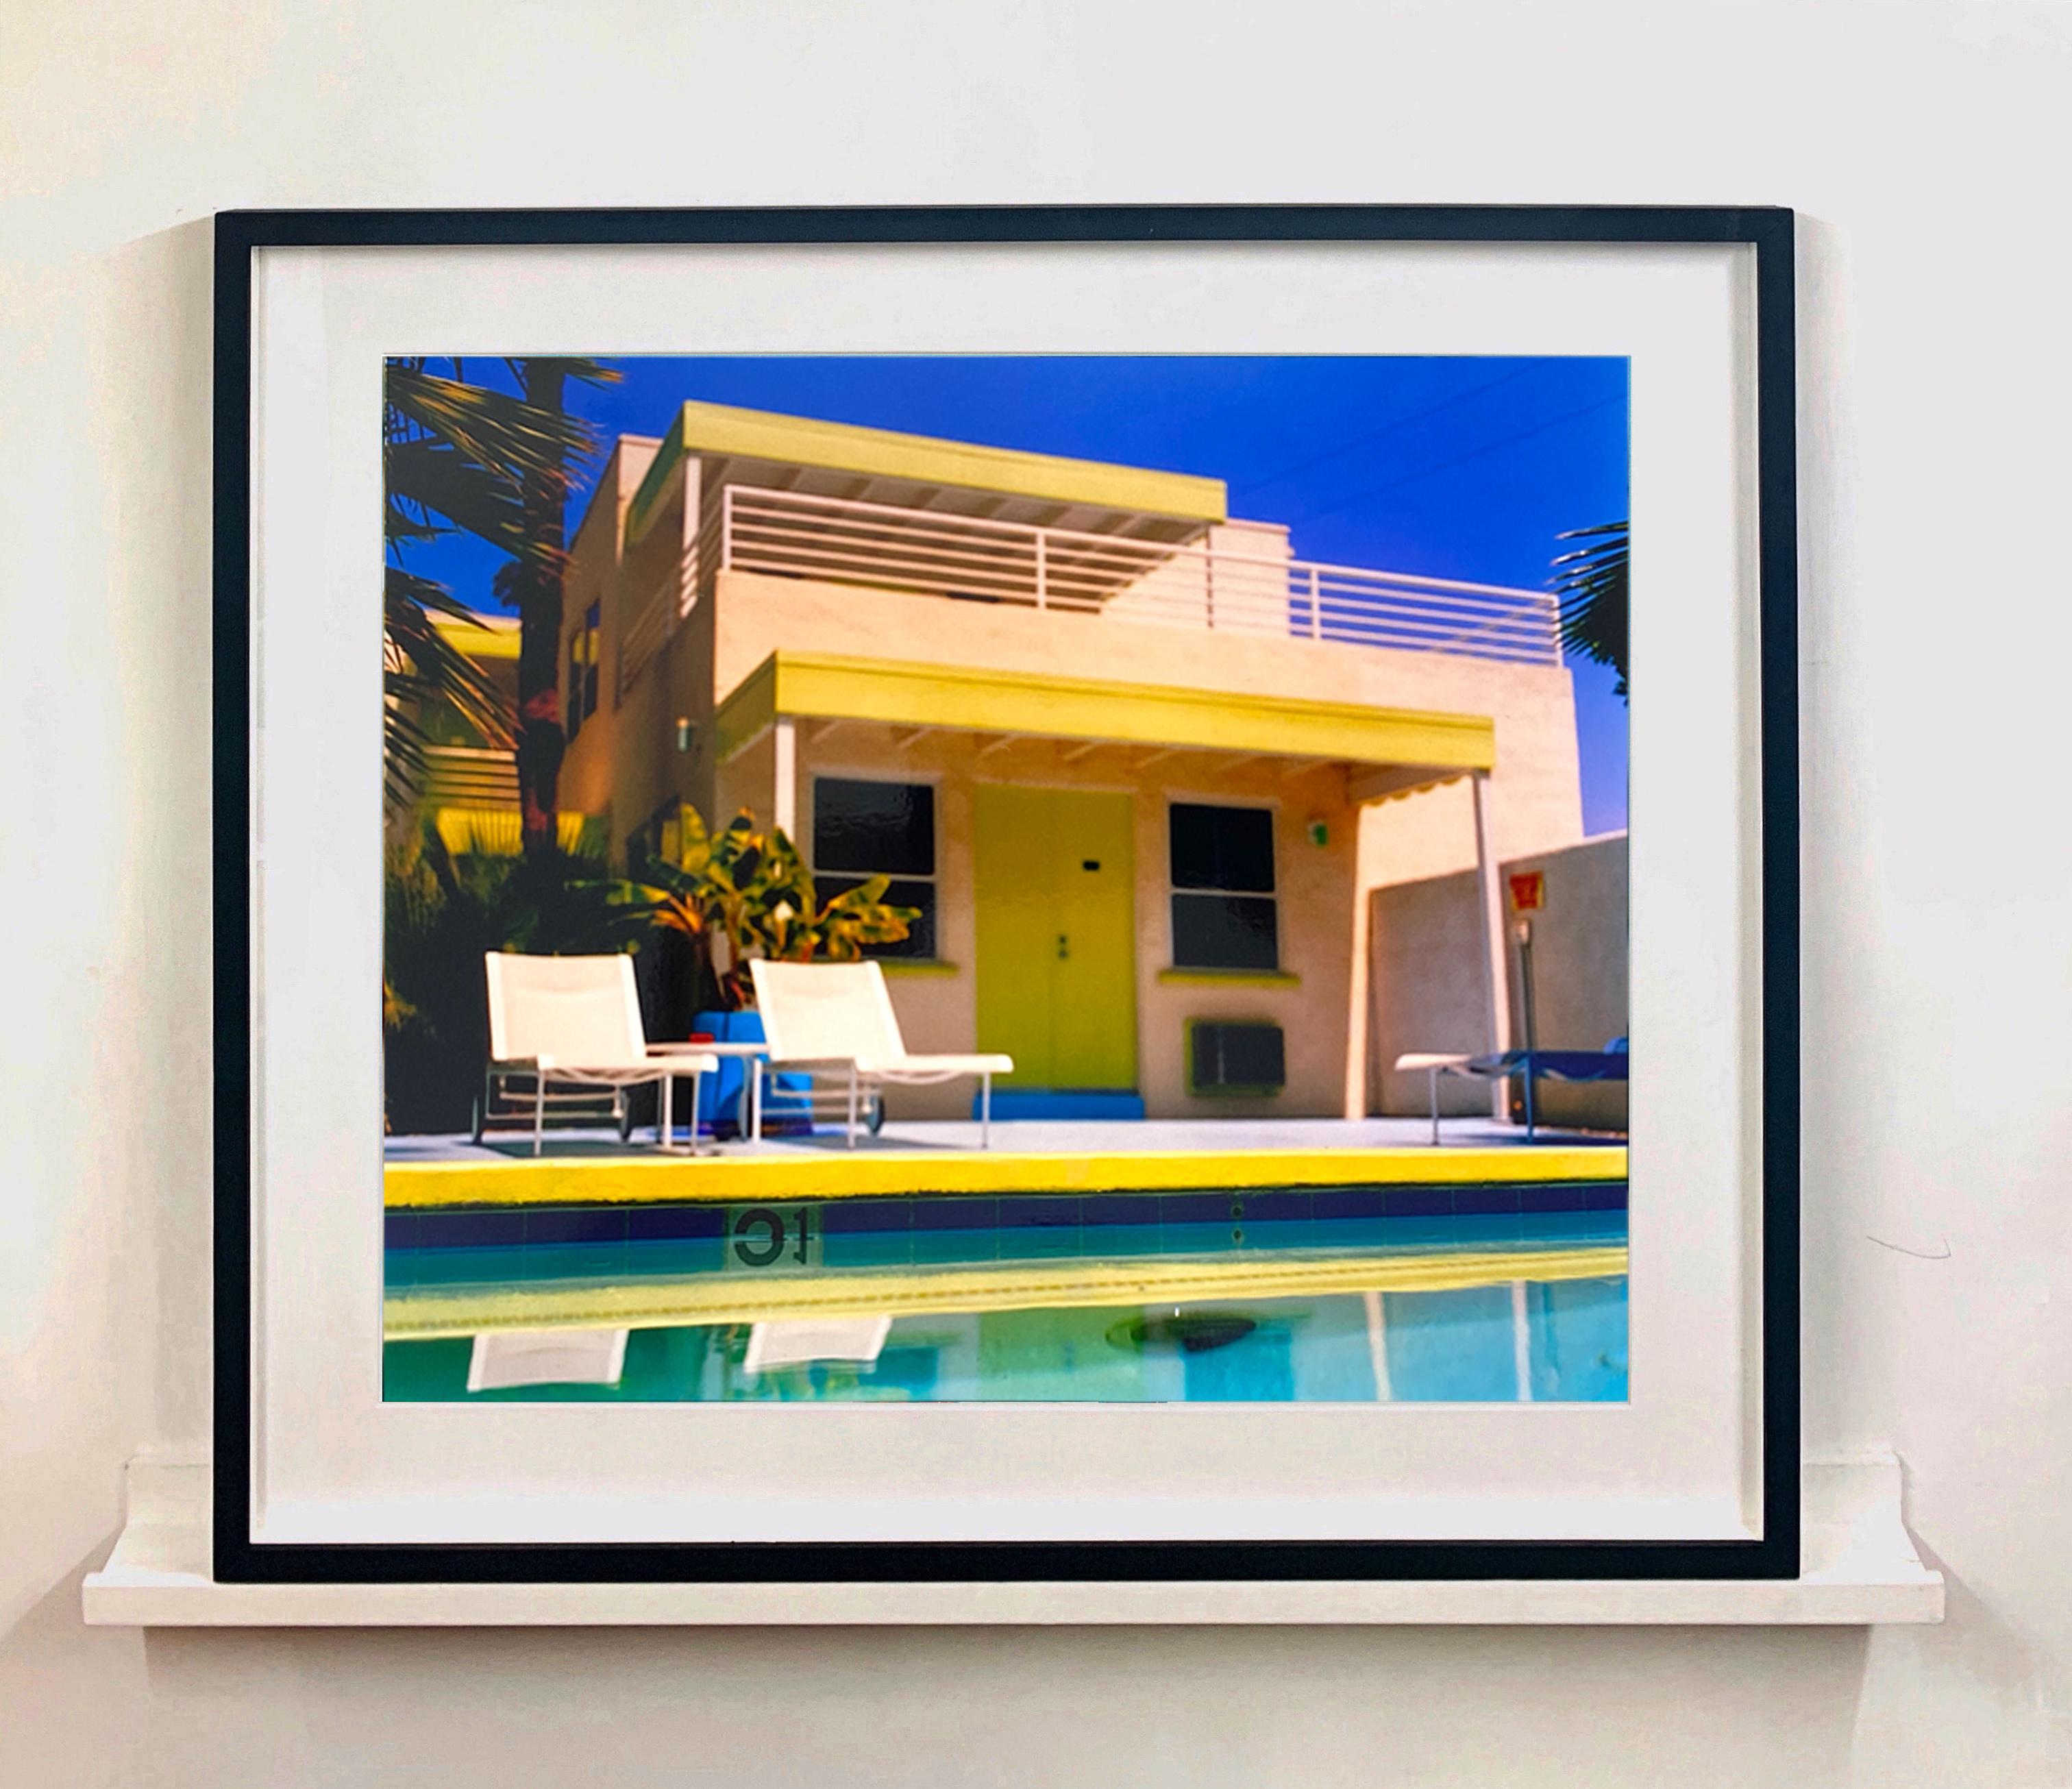 Palm Springs Pool Side, photograph by Richard Heeps taken at Ballantines Movie Colony. This artwork captures the classic mid-century Palm Springs architecture set against saturated blue skies and the cool pool with accents of pink and almost neon